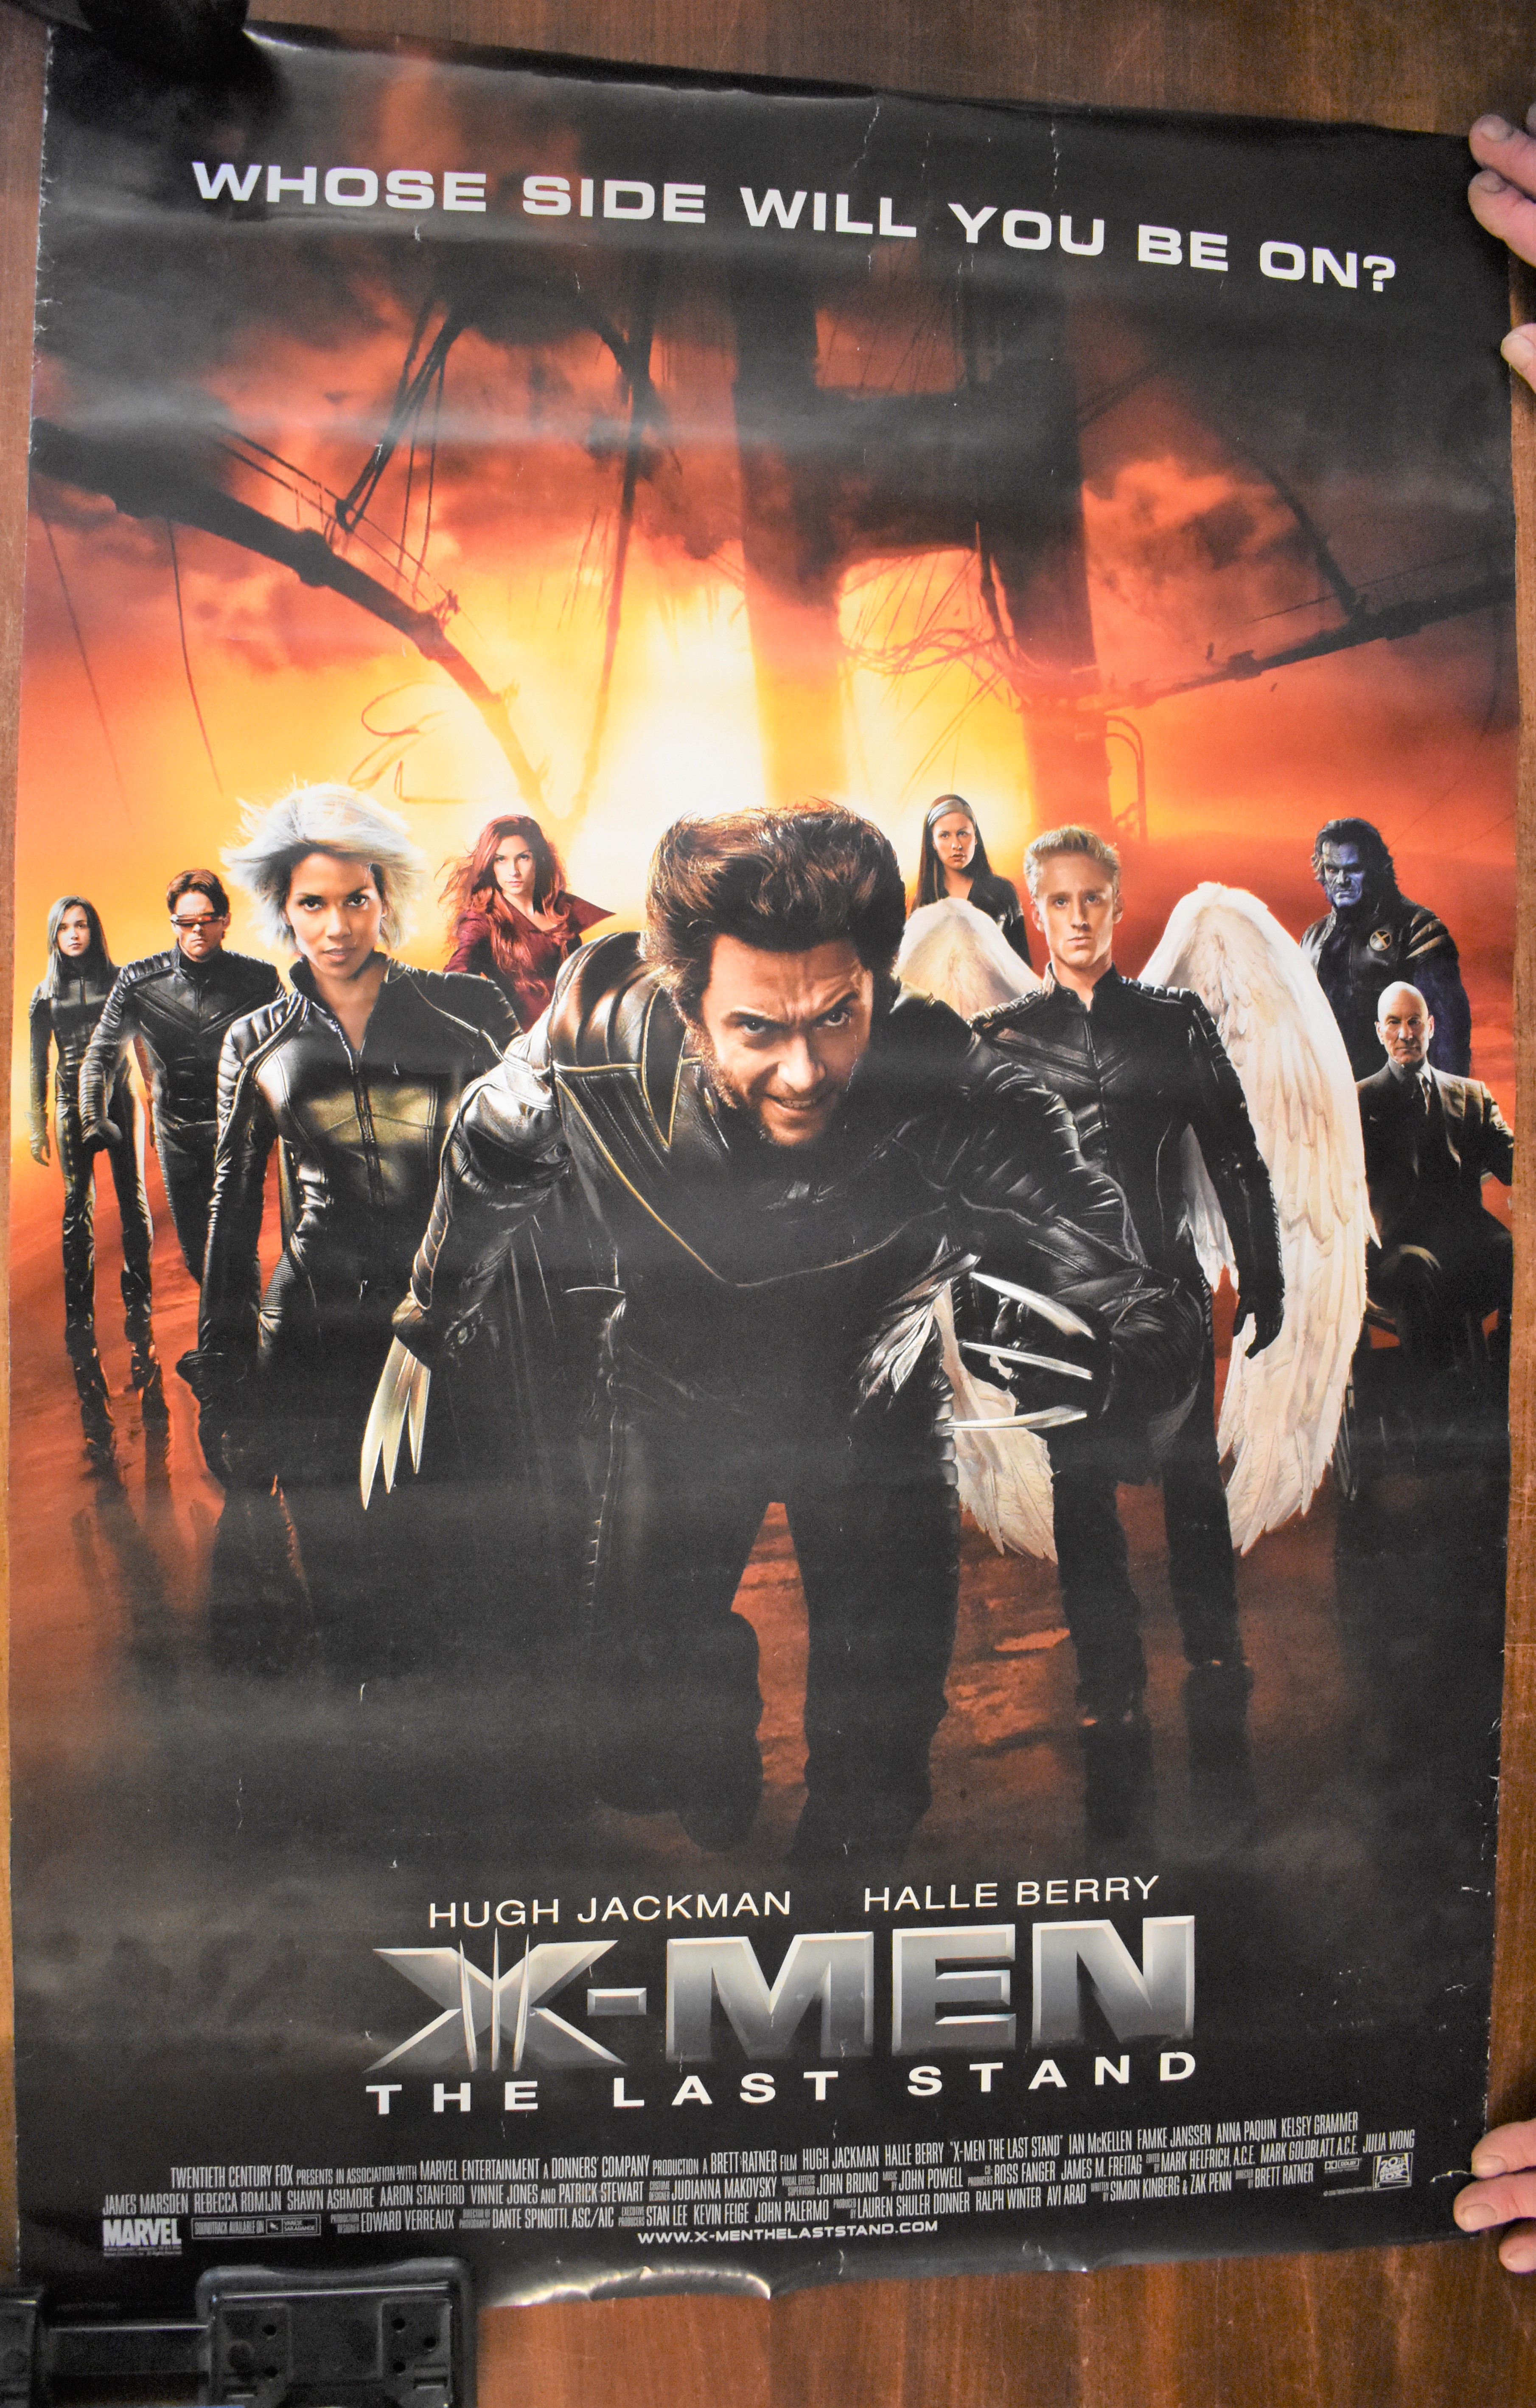 X-Men (Last Stand) - Cinematic release poster, starring Hugh Jackman and Halle Berry, released May